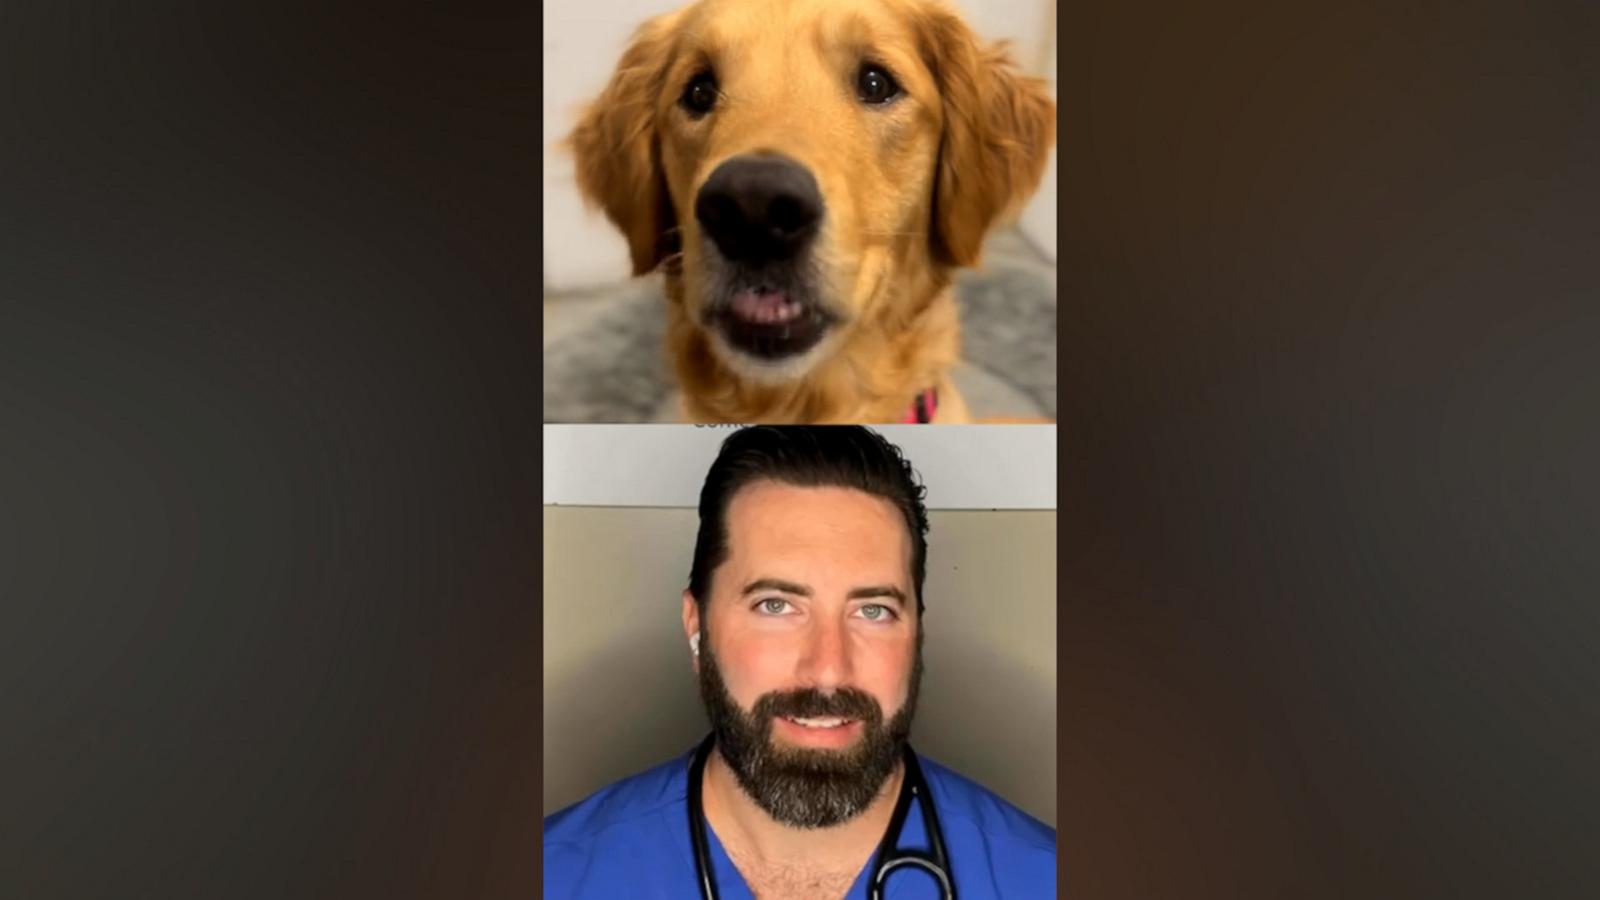 VIDEO: Veterinarian breaks down why dogs do 'chompies' or excessive biting of air